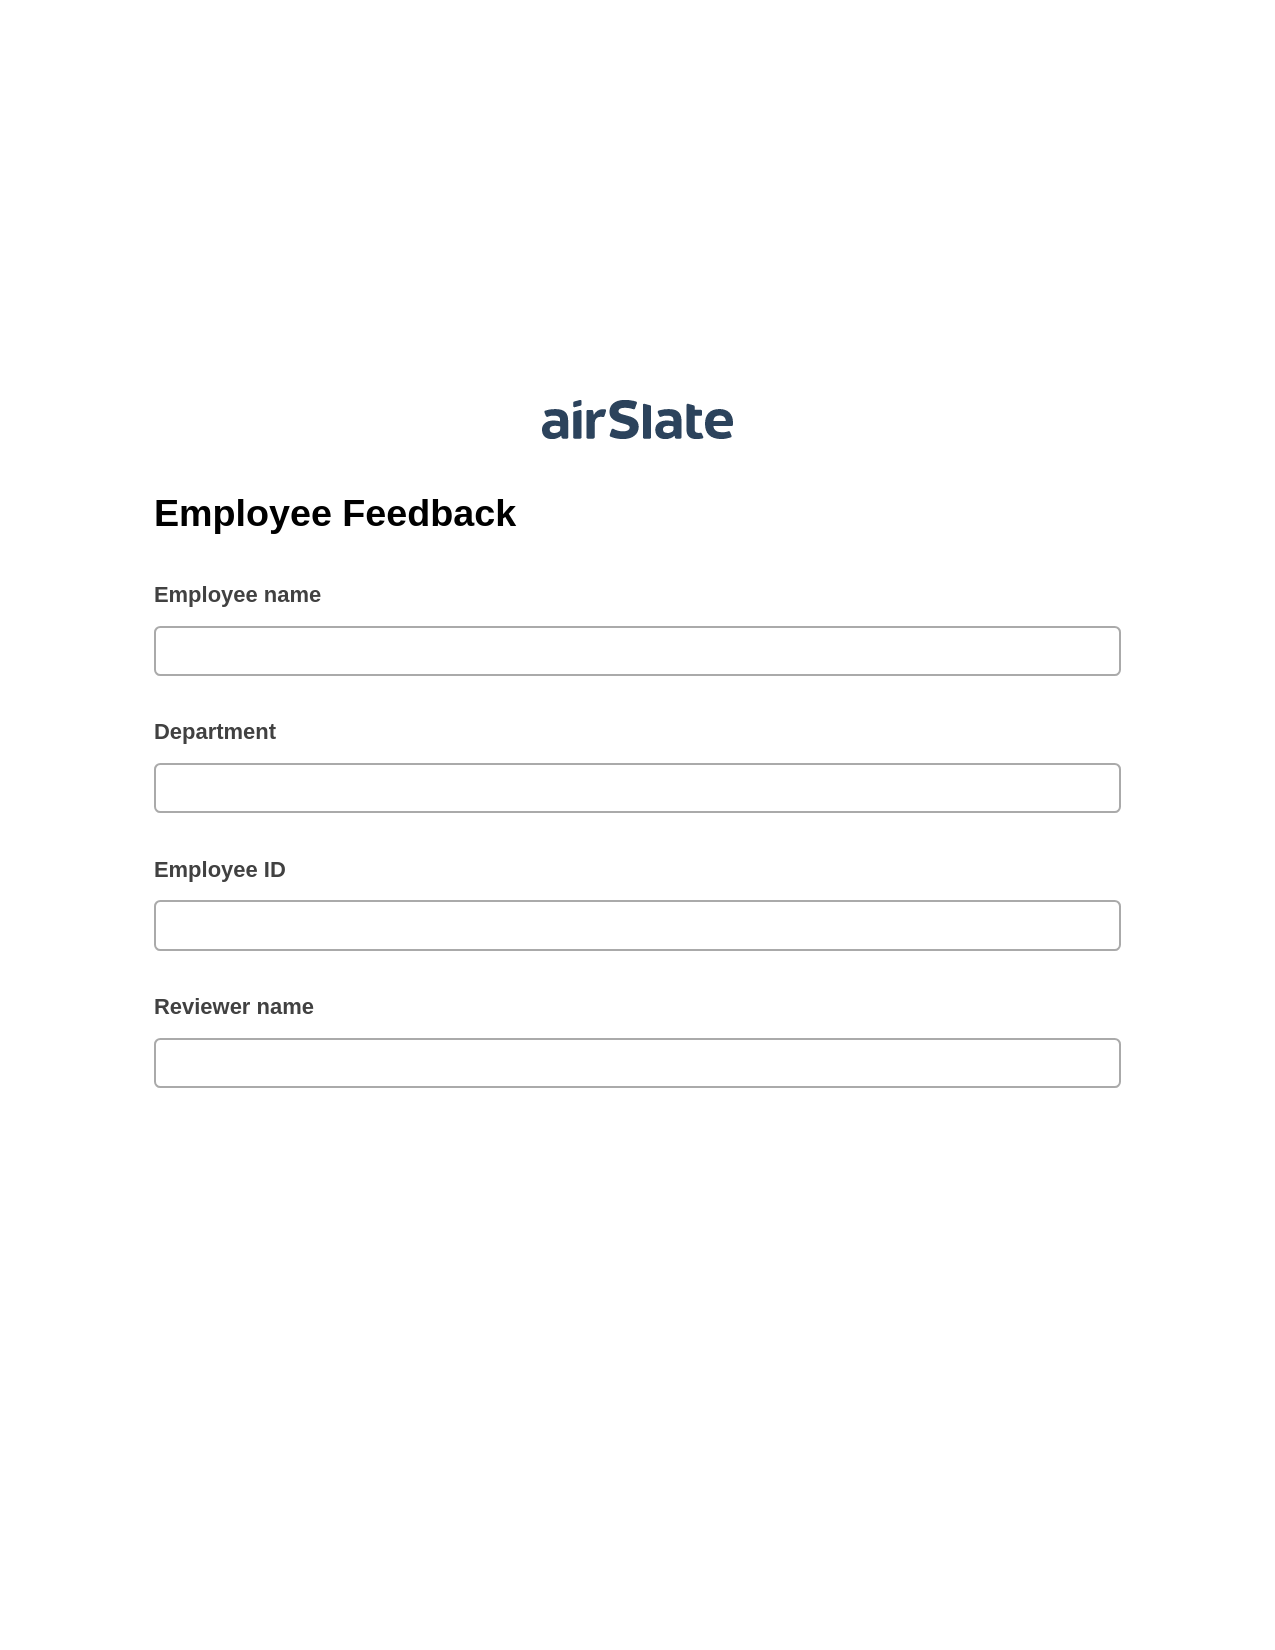 Employee Feedback Pre-fill from another Slate Bot, Webhook Bot, Archive to SharePoint Folder Bot